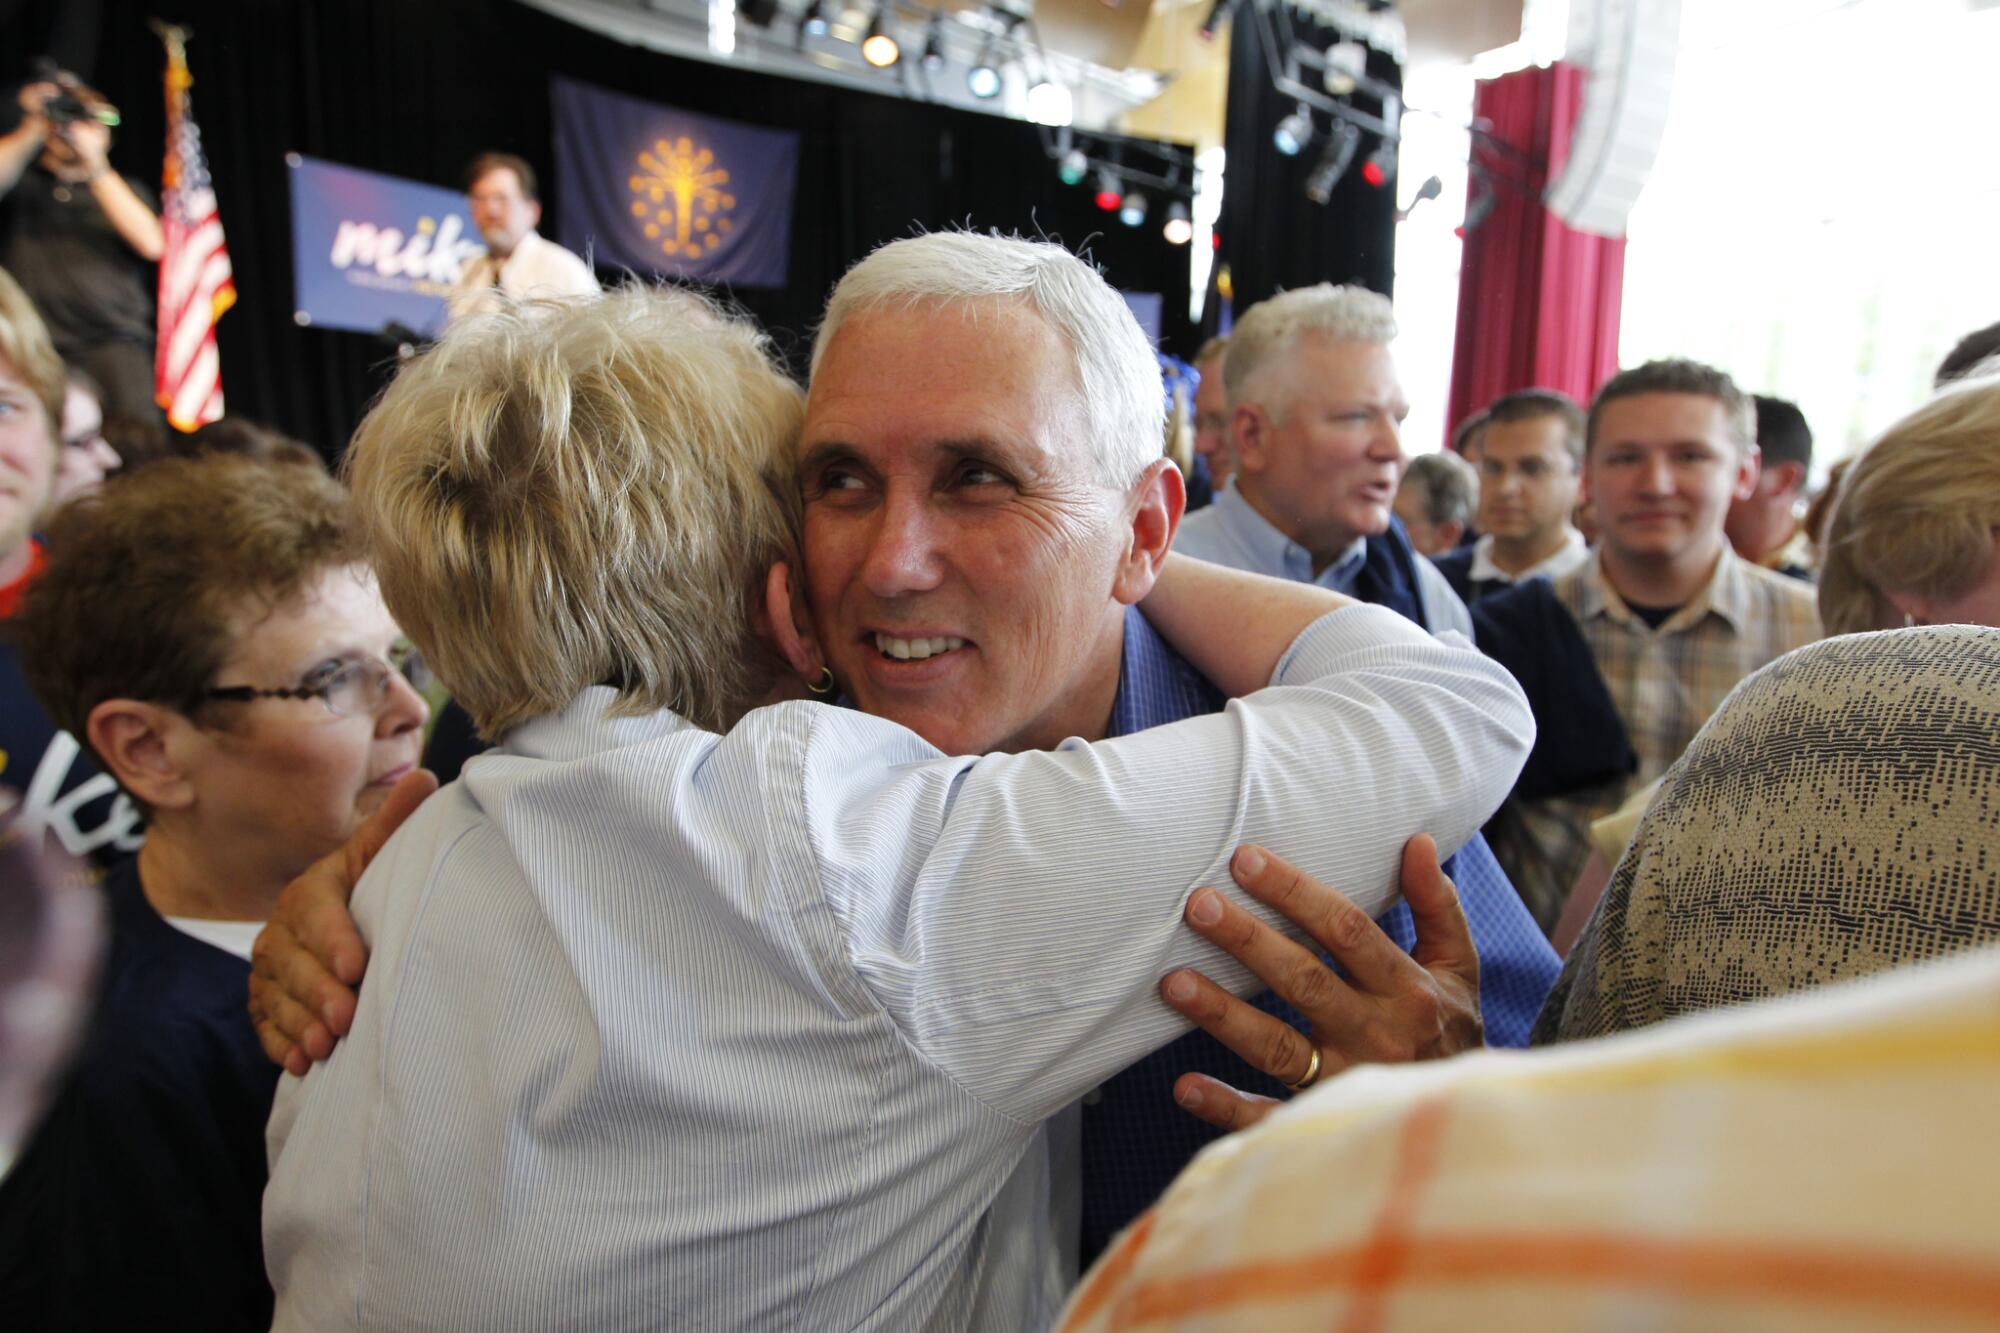 Then-Rep. Mike Pence hugs one of many supporters at a 2011 event in Columbus, Ind., to kick off his gubernatorial run.